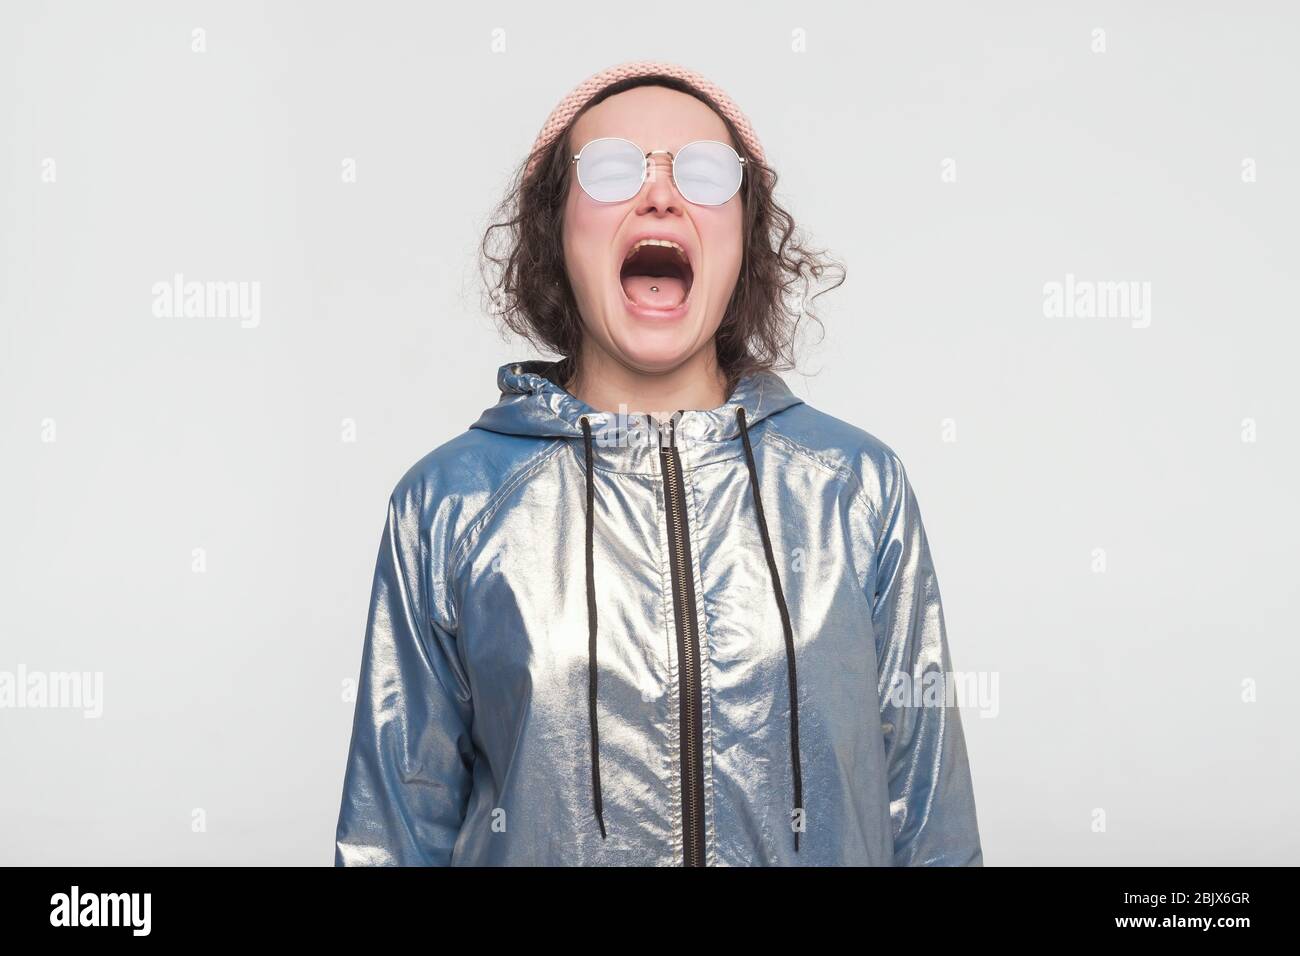 Emotional angry woman in silver coat and summerglasses screaming. Emotional, young face. Human emotions, facial expression concept. Stock Photo